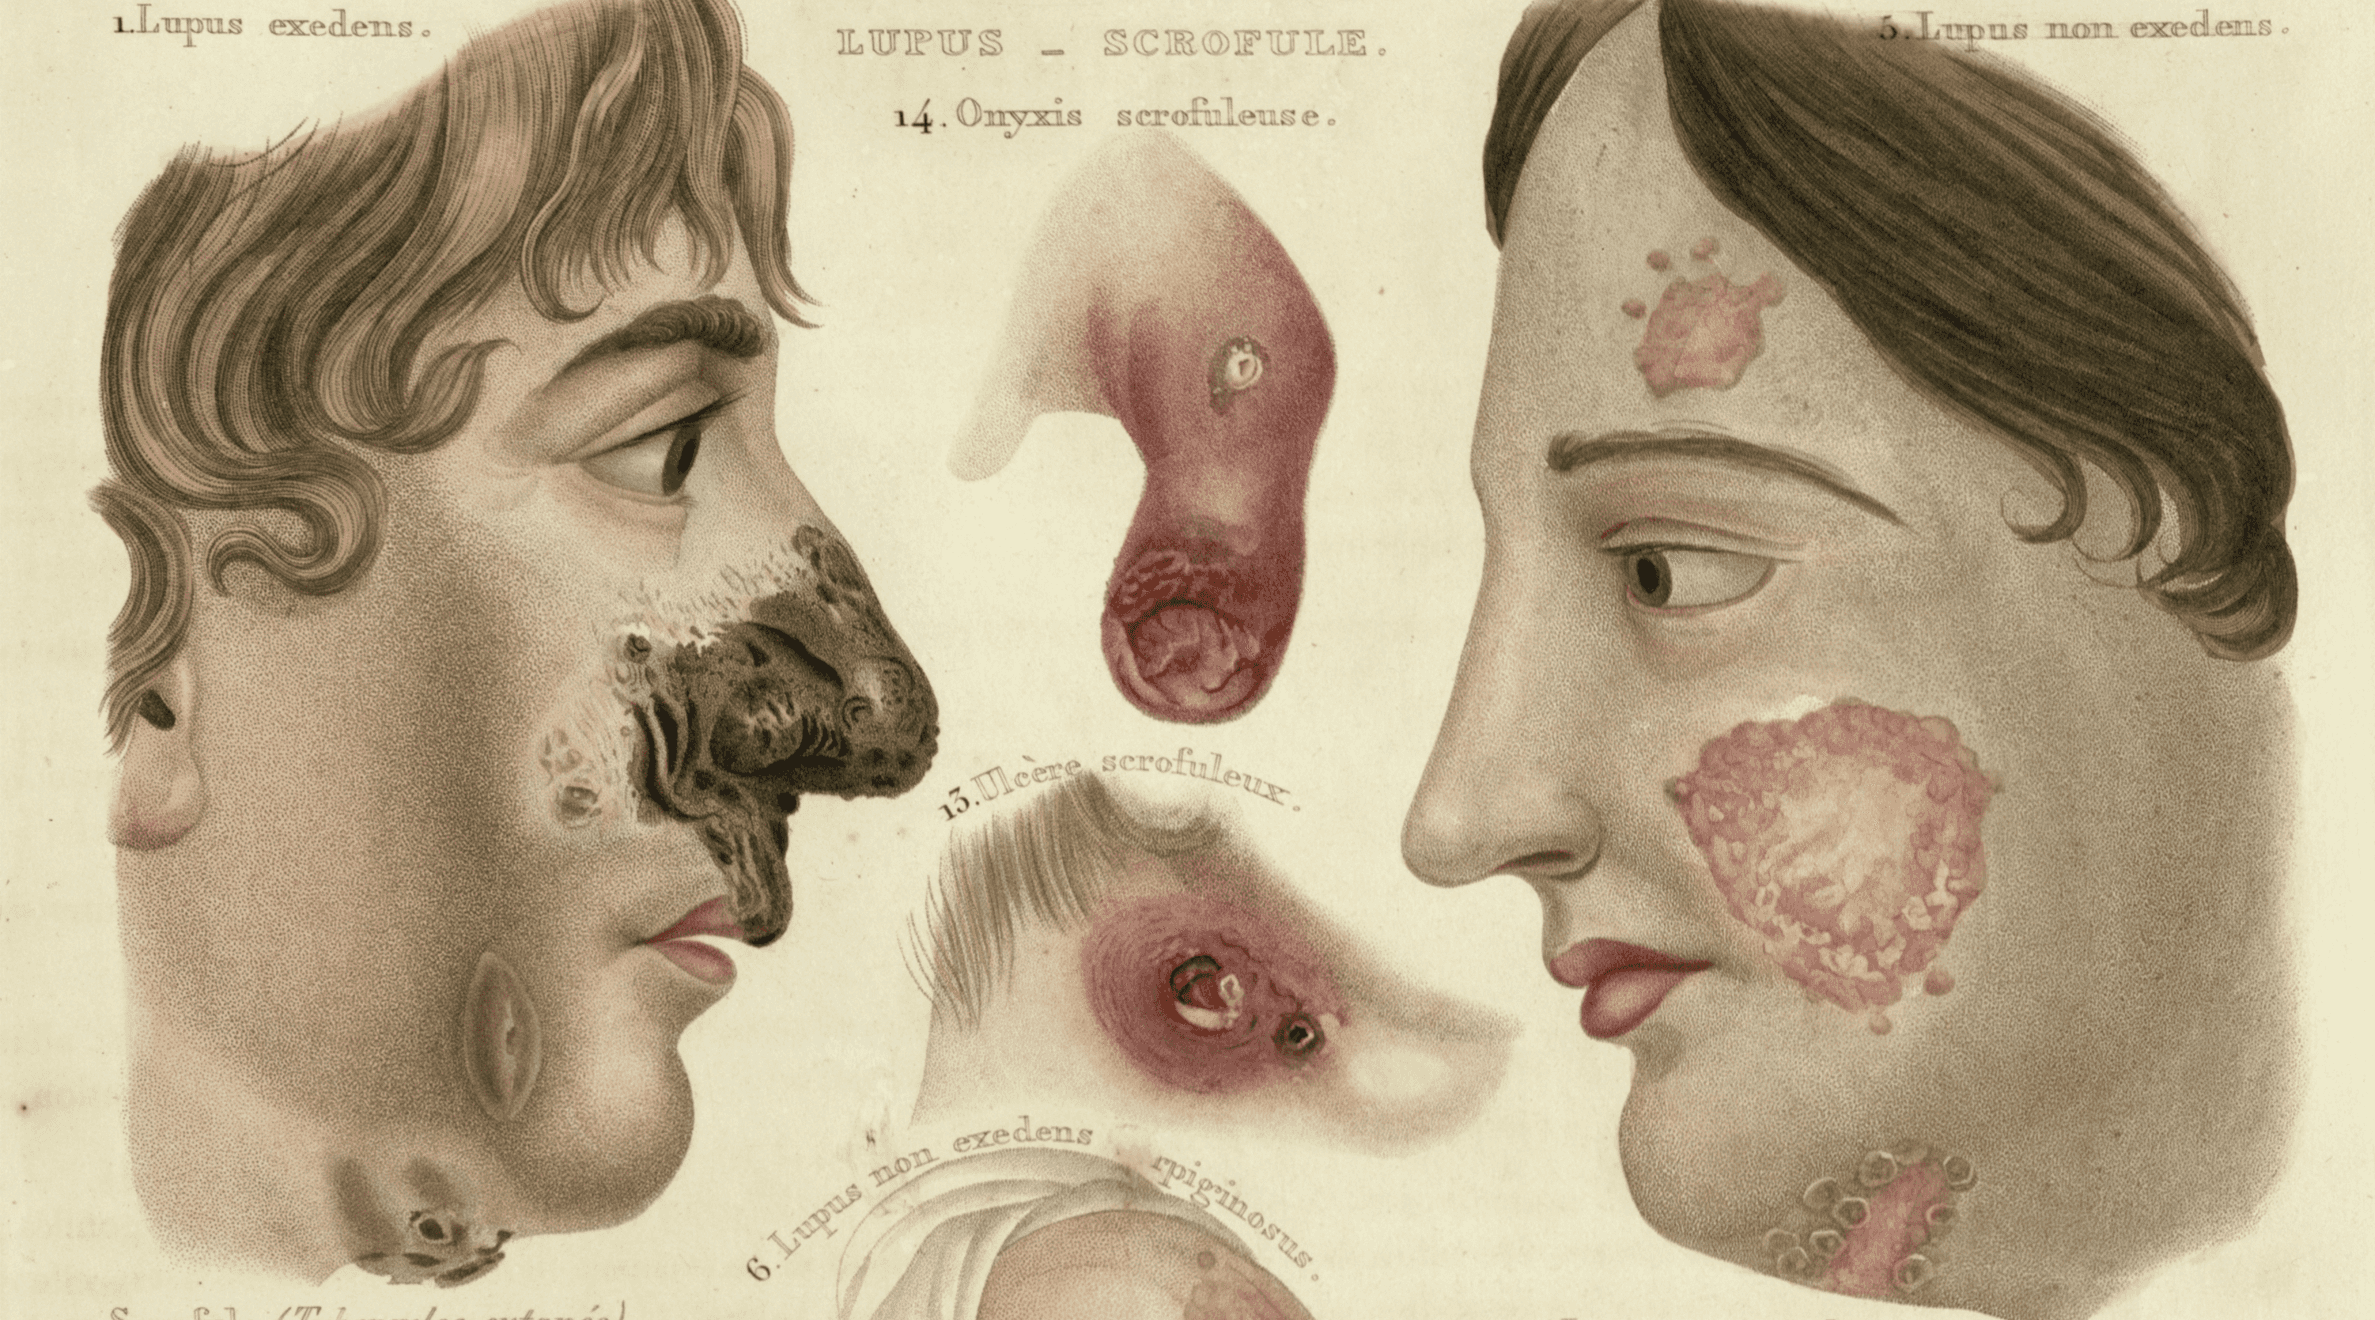 Colorful illustrations of skin damage of various severity 